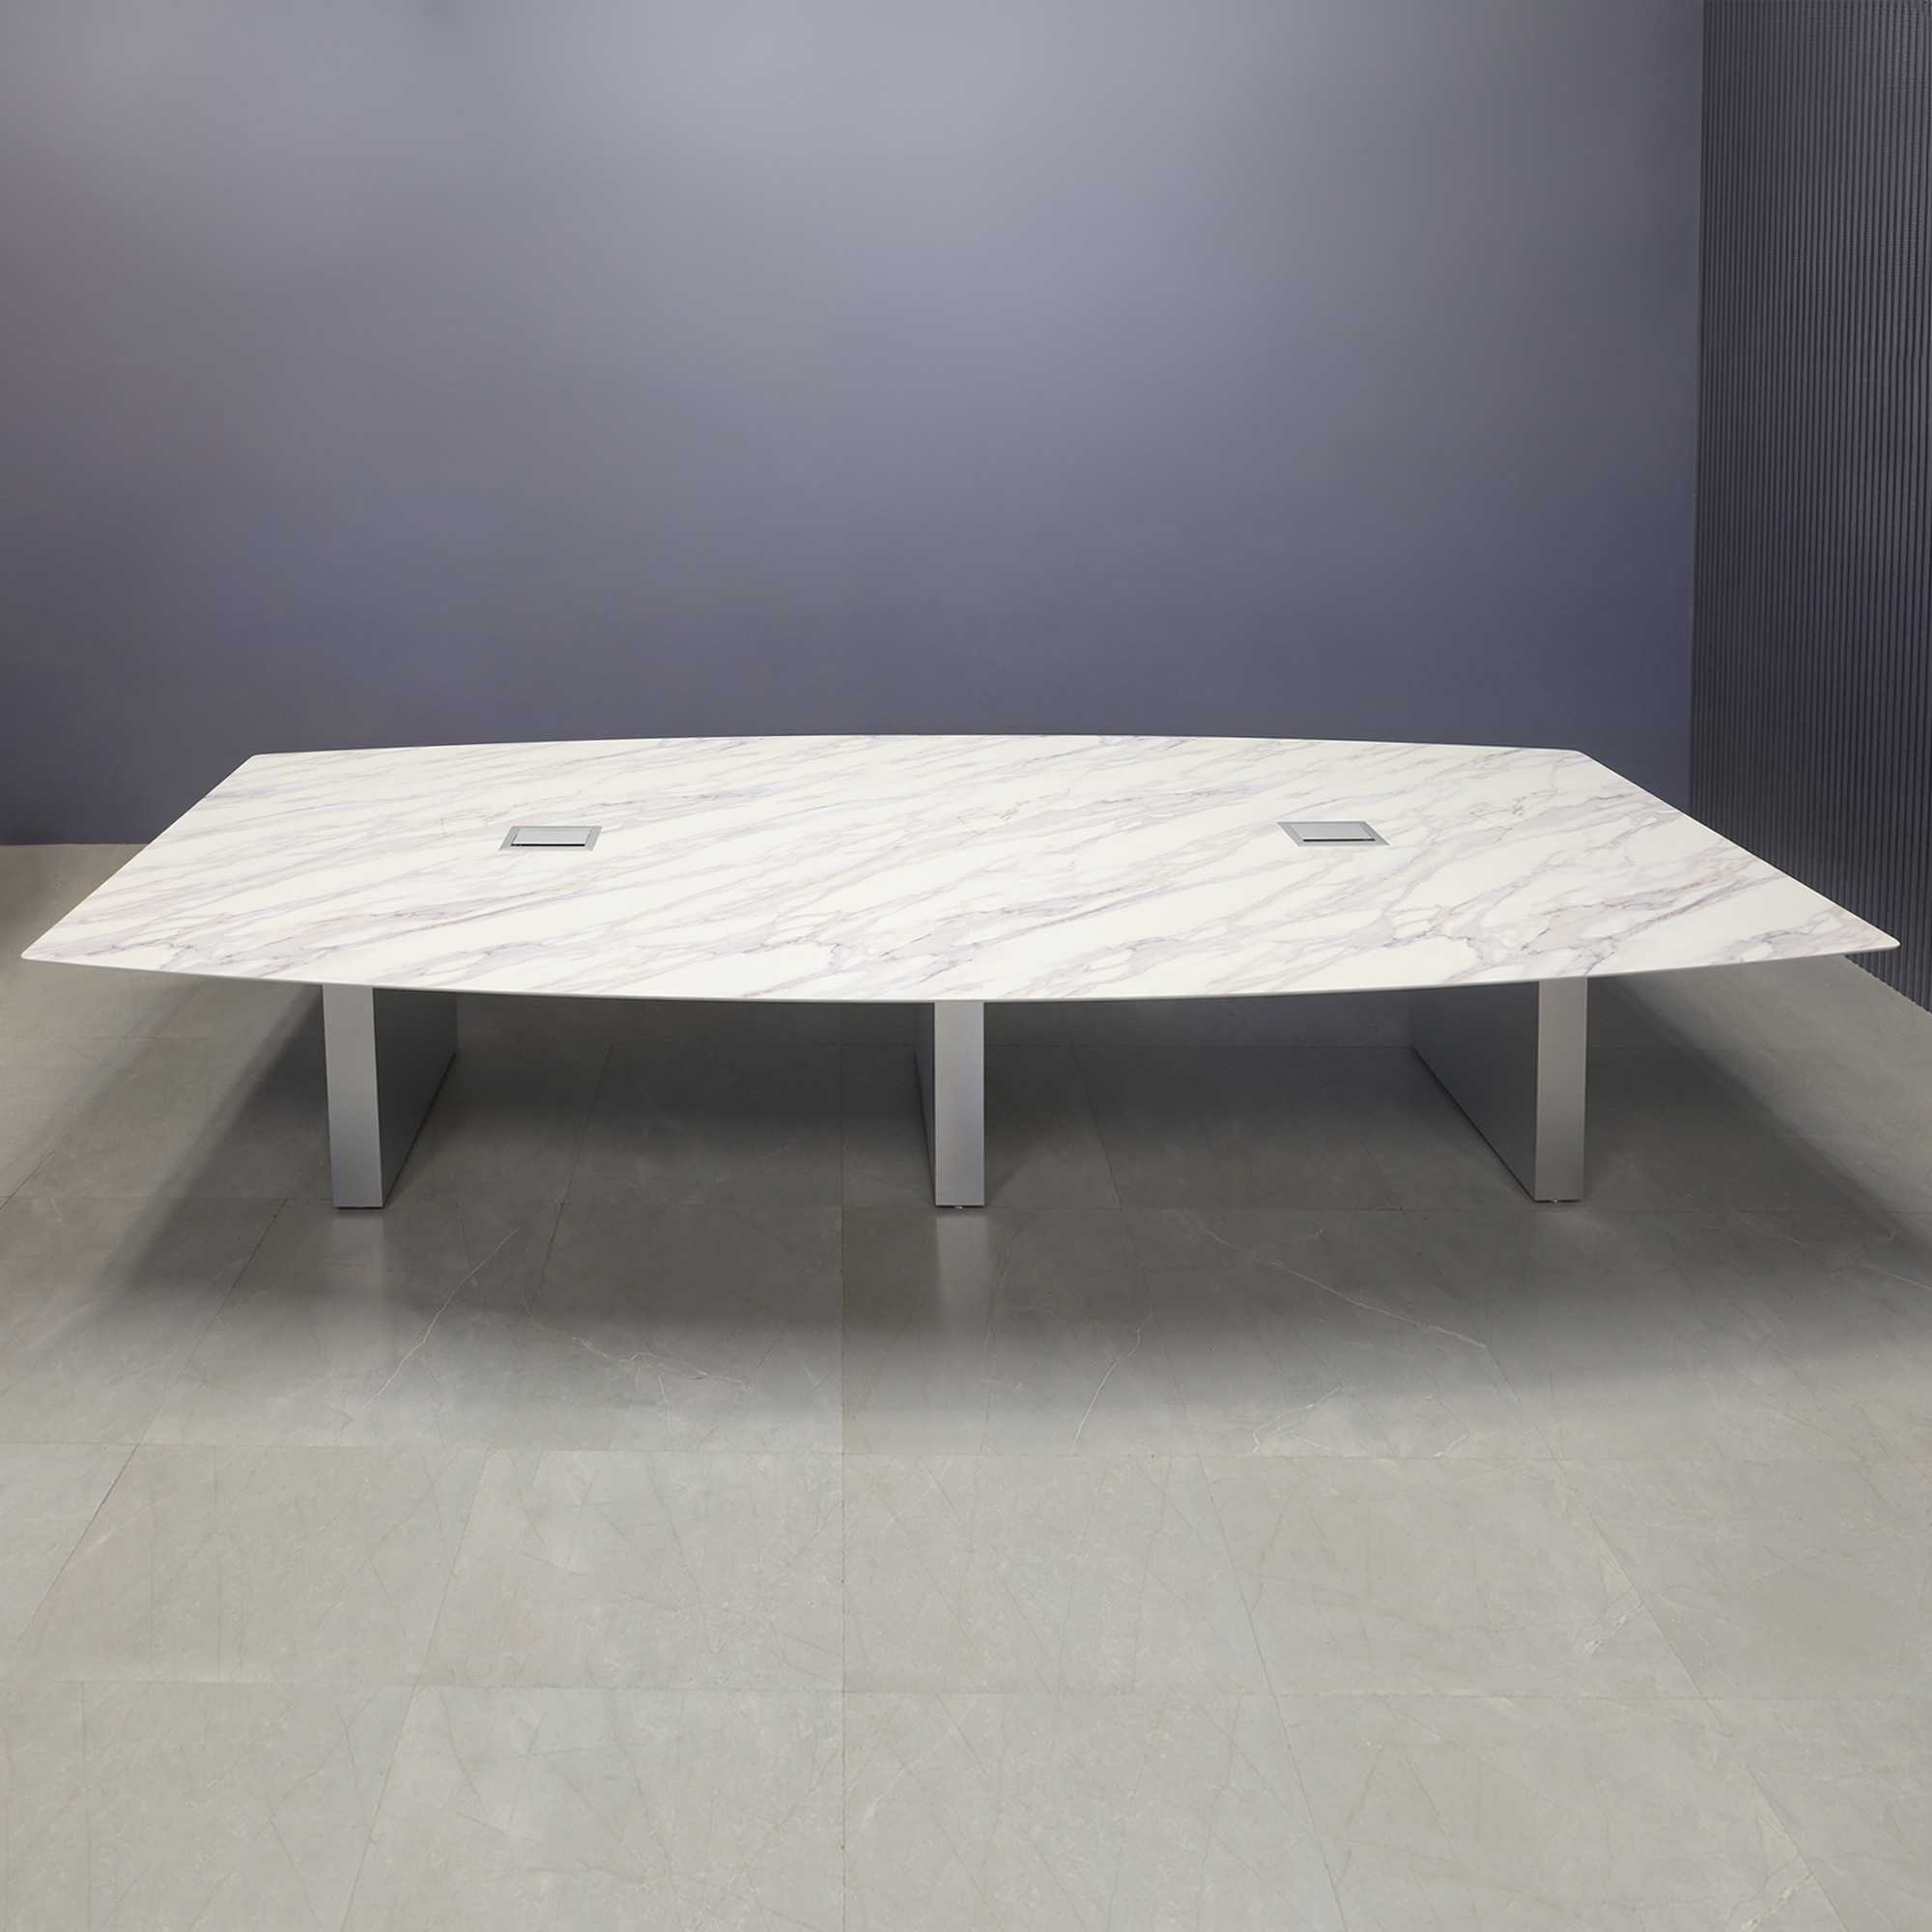 142-inch Aurora Boat Conference Table in 1/2